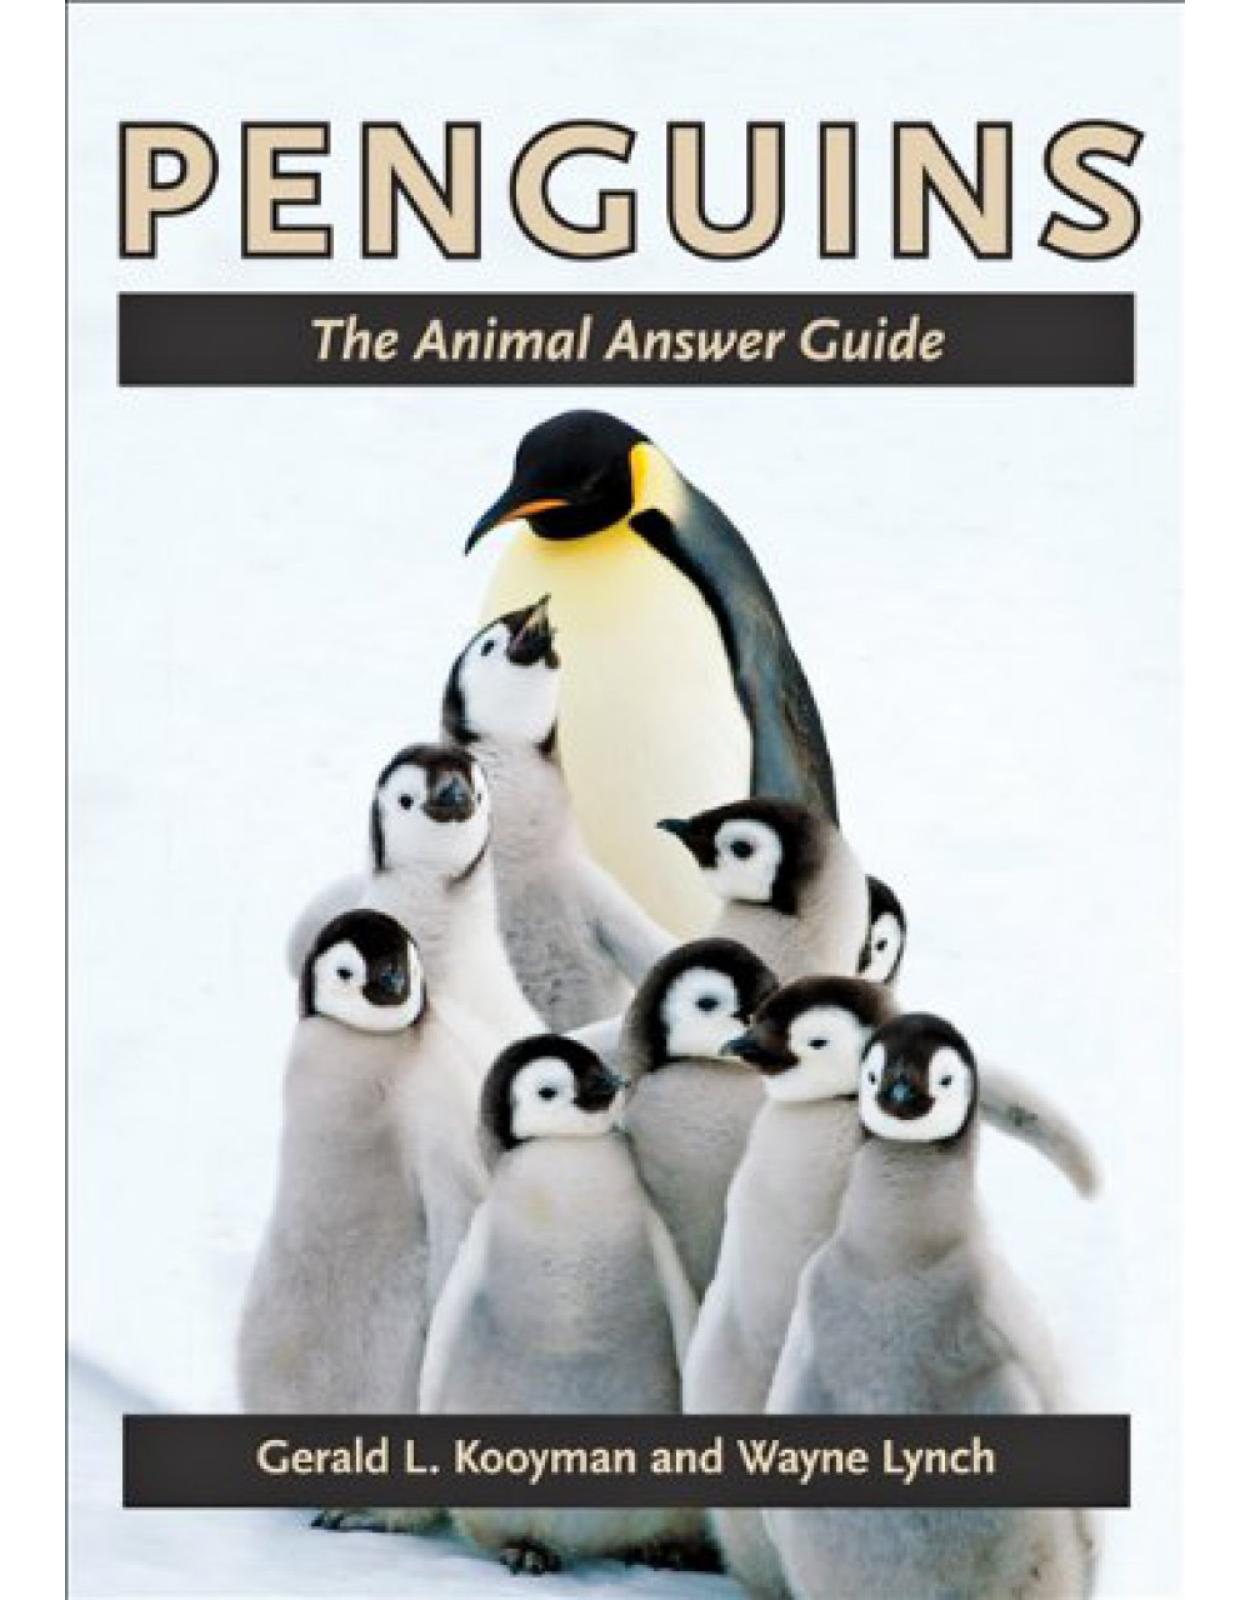 Penguins. The Animal Answer Guide